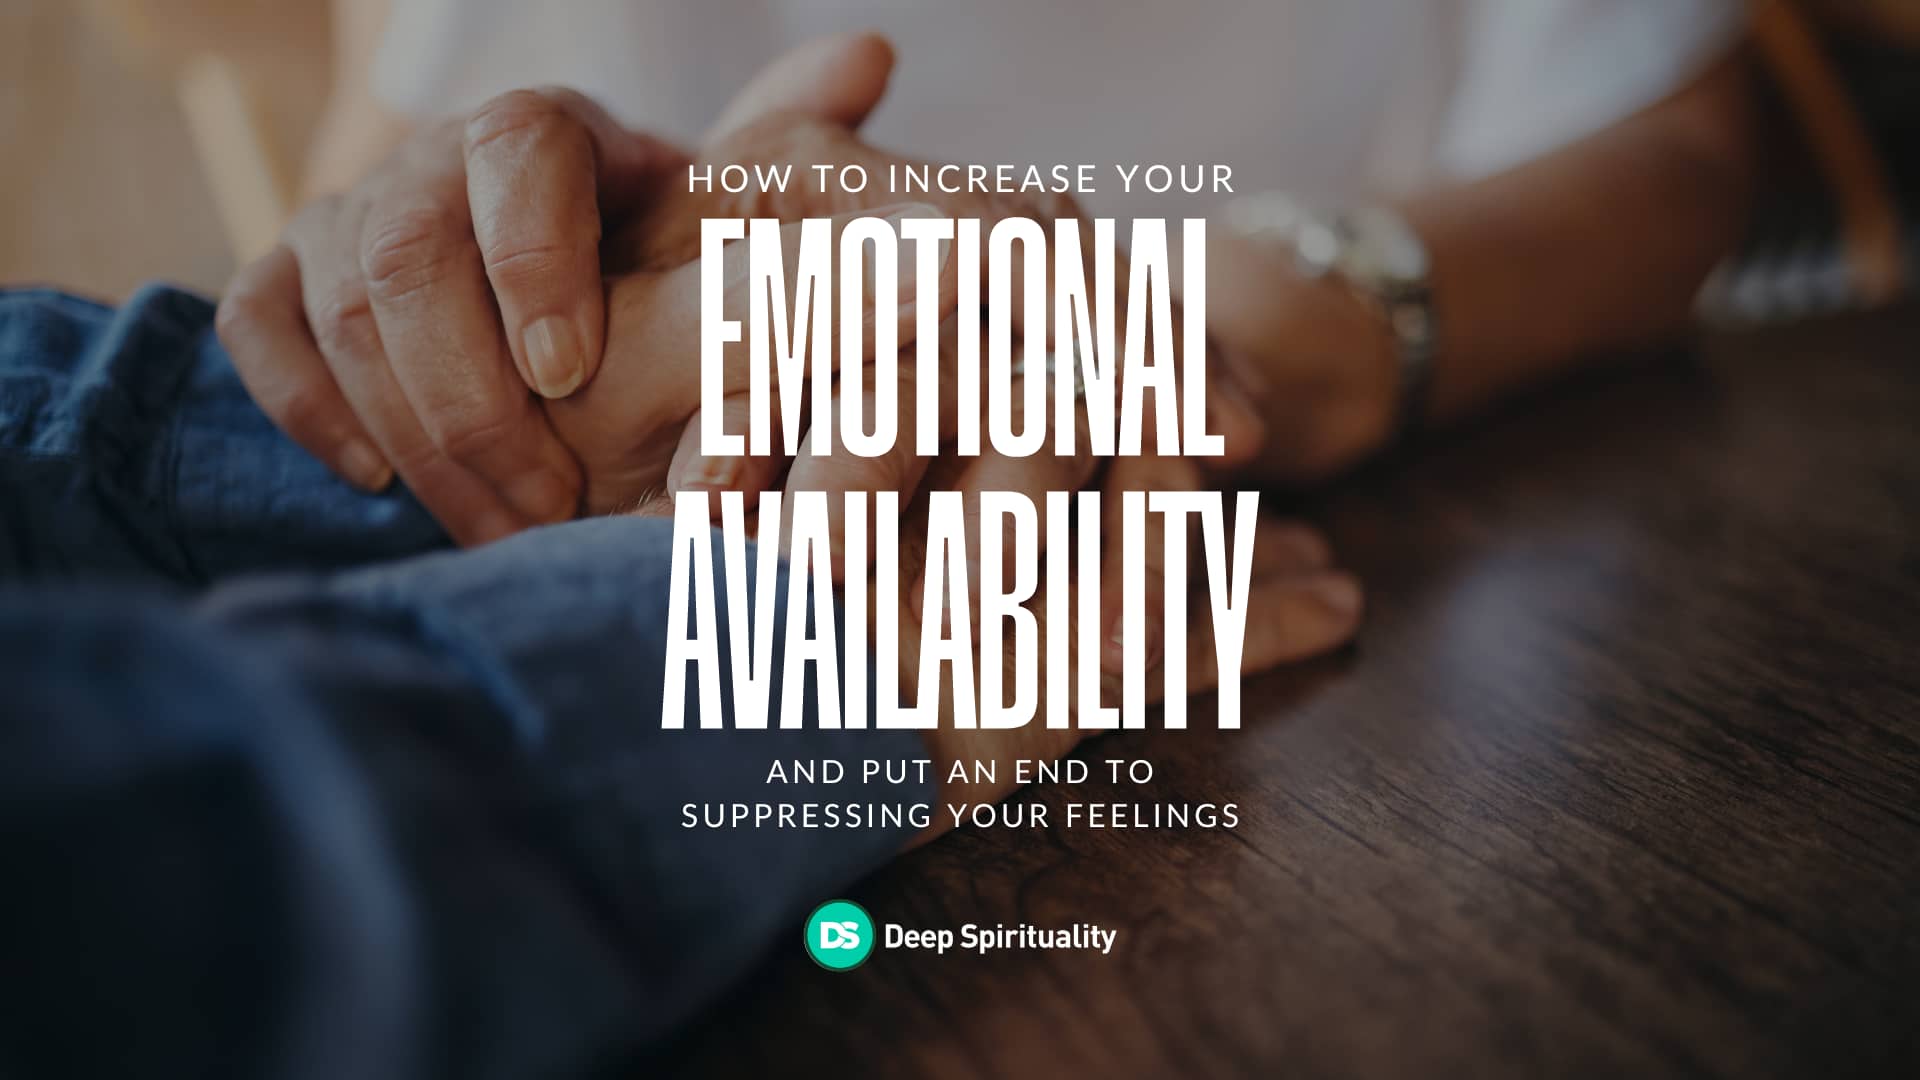 How to Increase Your Emotional Availability and Put an End to Suppressing Your Feelings 6